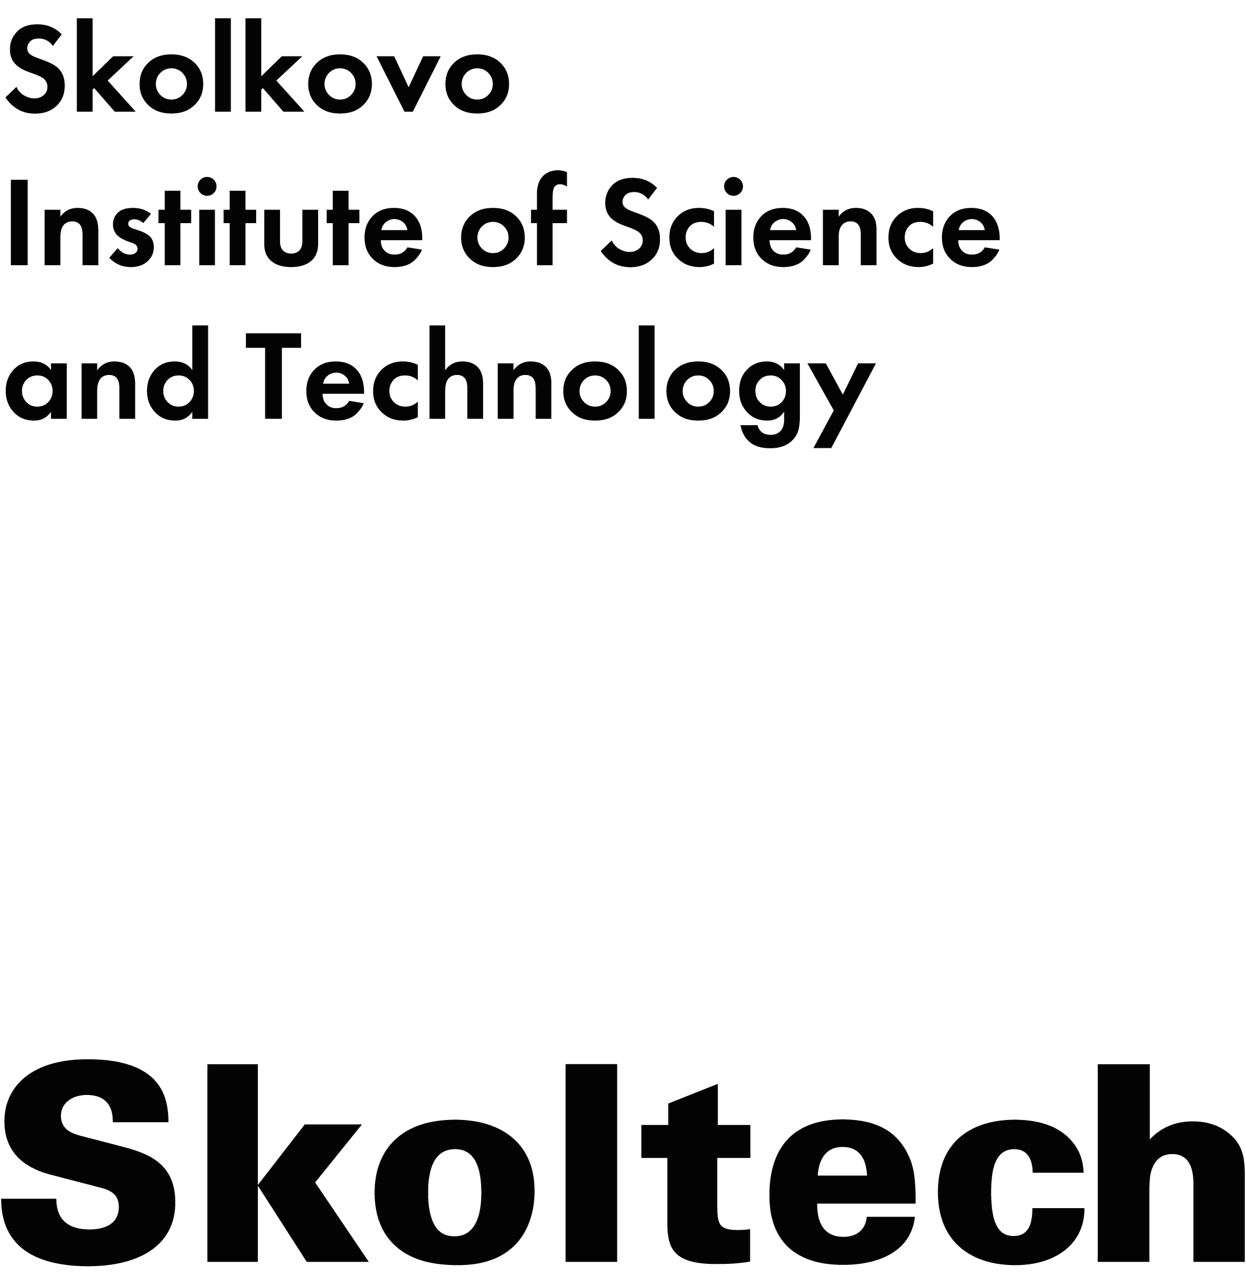 Skolkovo institute if Science and Rechnology